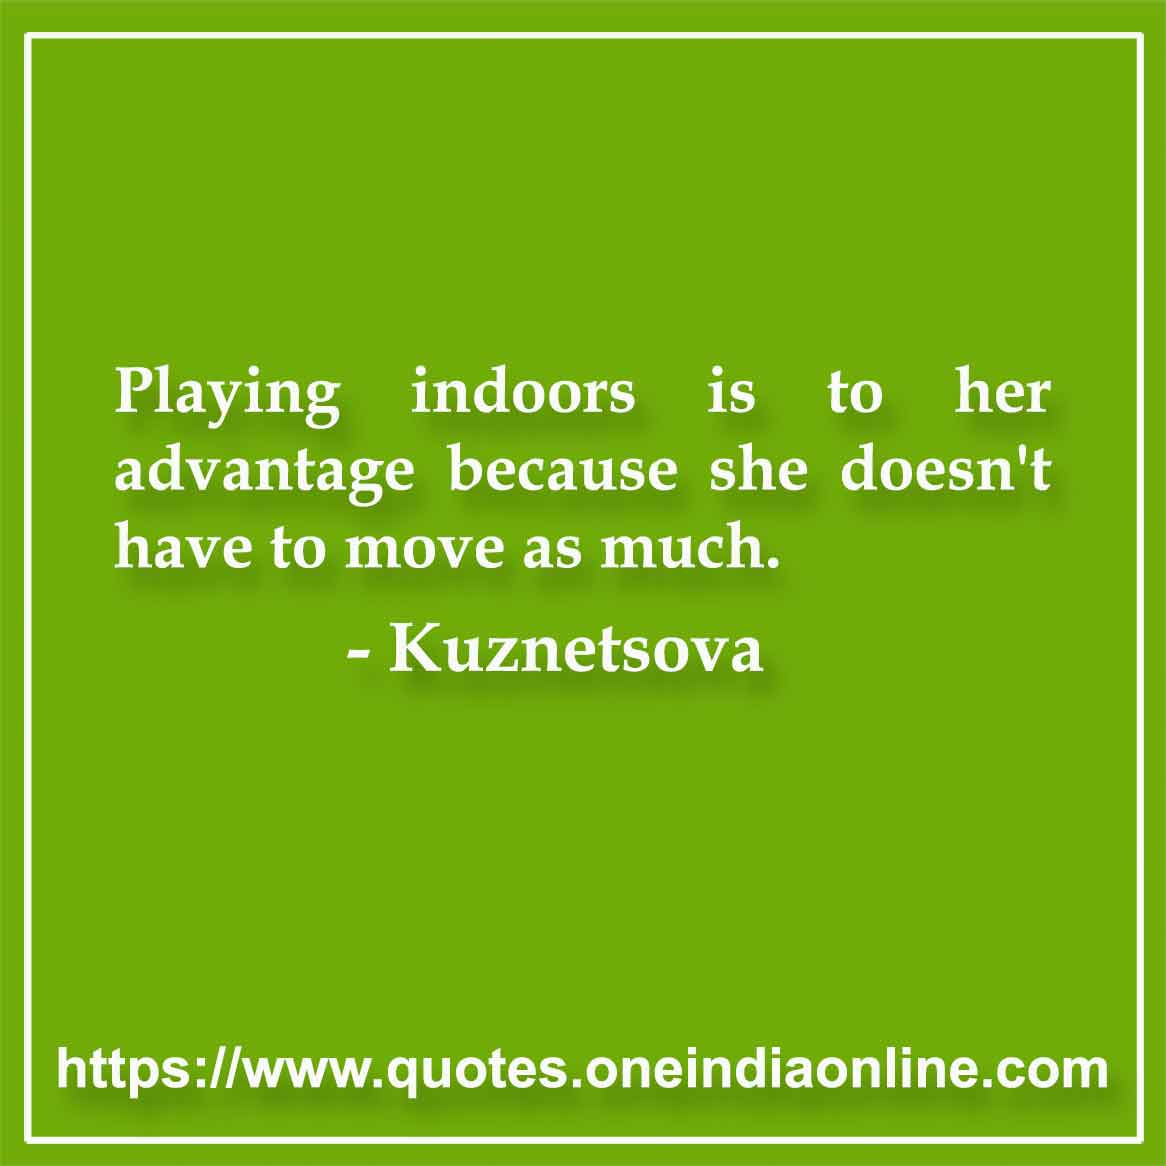 Playing indoors is to her advantage because she doesn't have to move as much.

- Kuznetsova